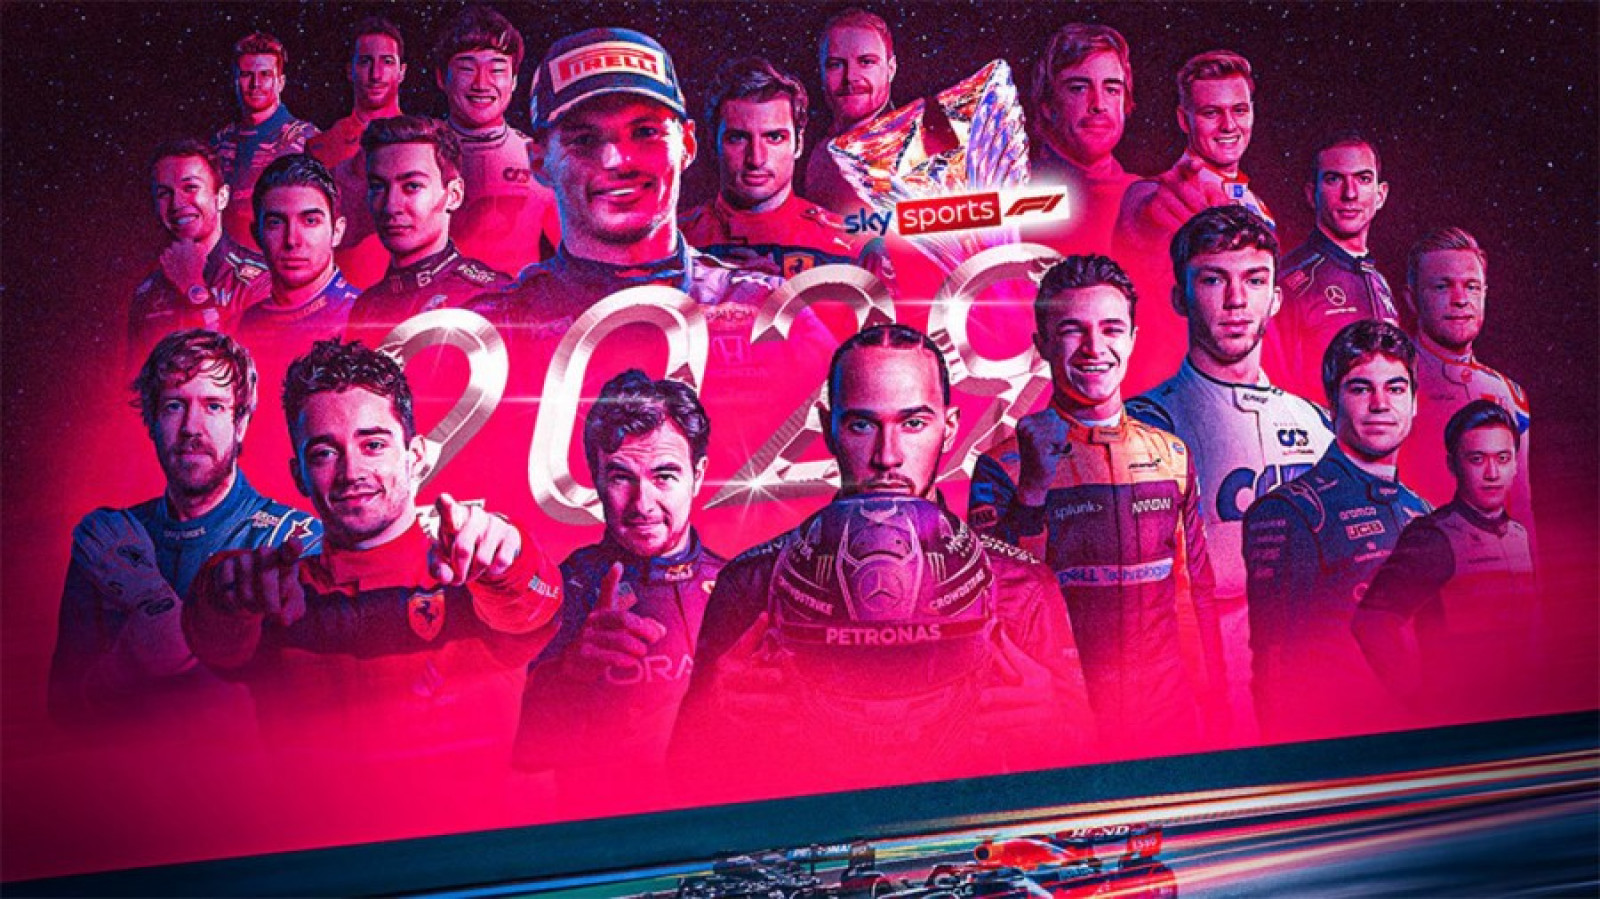 Cover image for Why Sky remains focused on Formula 1 as streaming TV remakes sports fandom